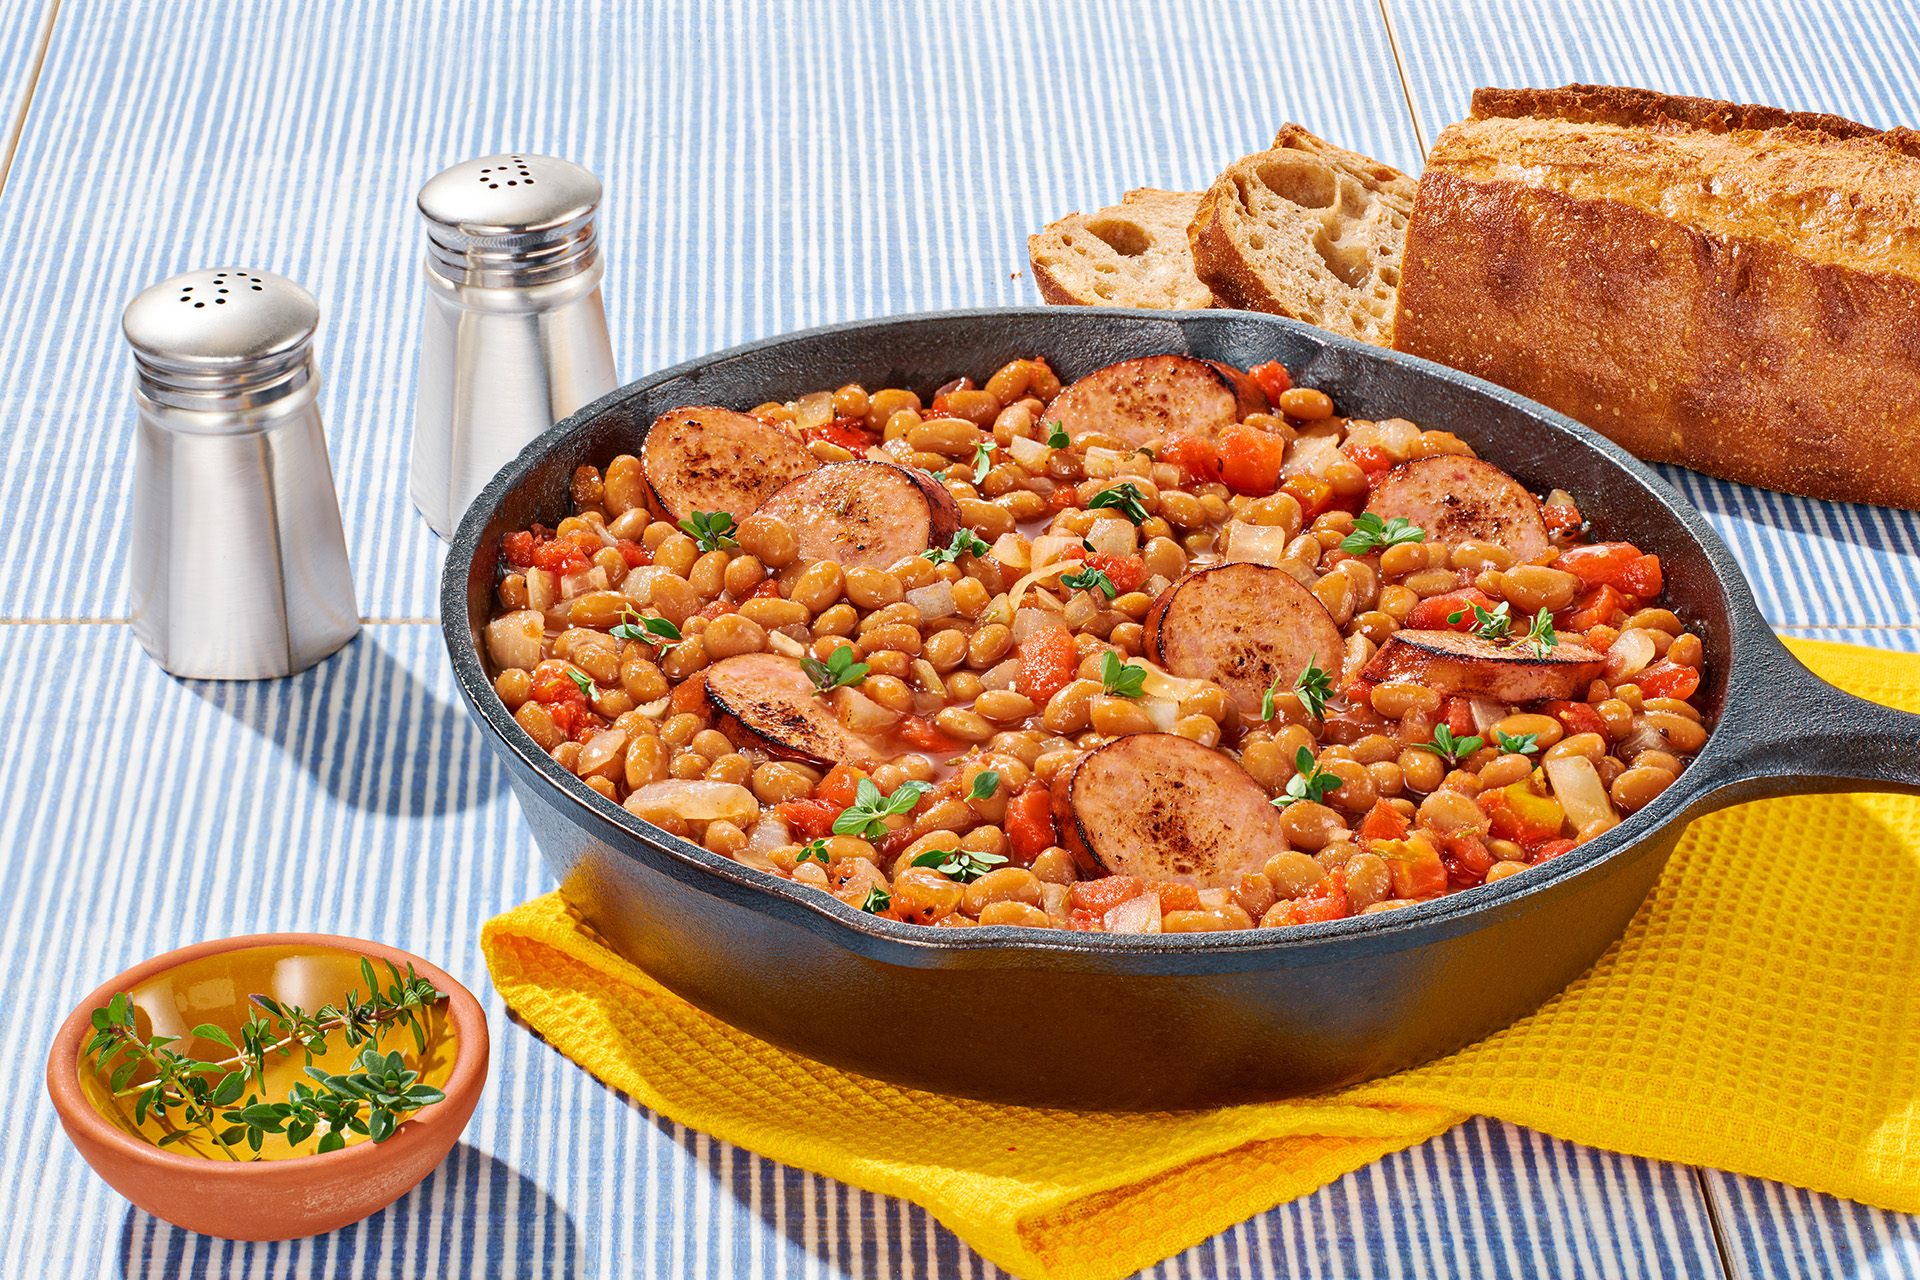 Baked bean and sliced sausage casserole in a cast iron skillet